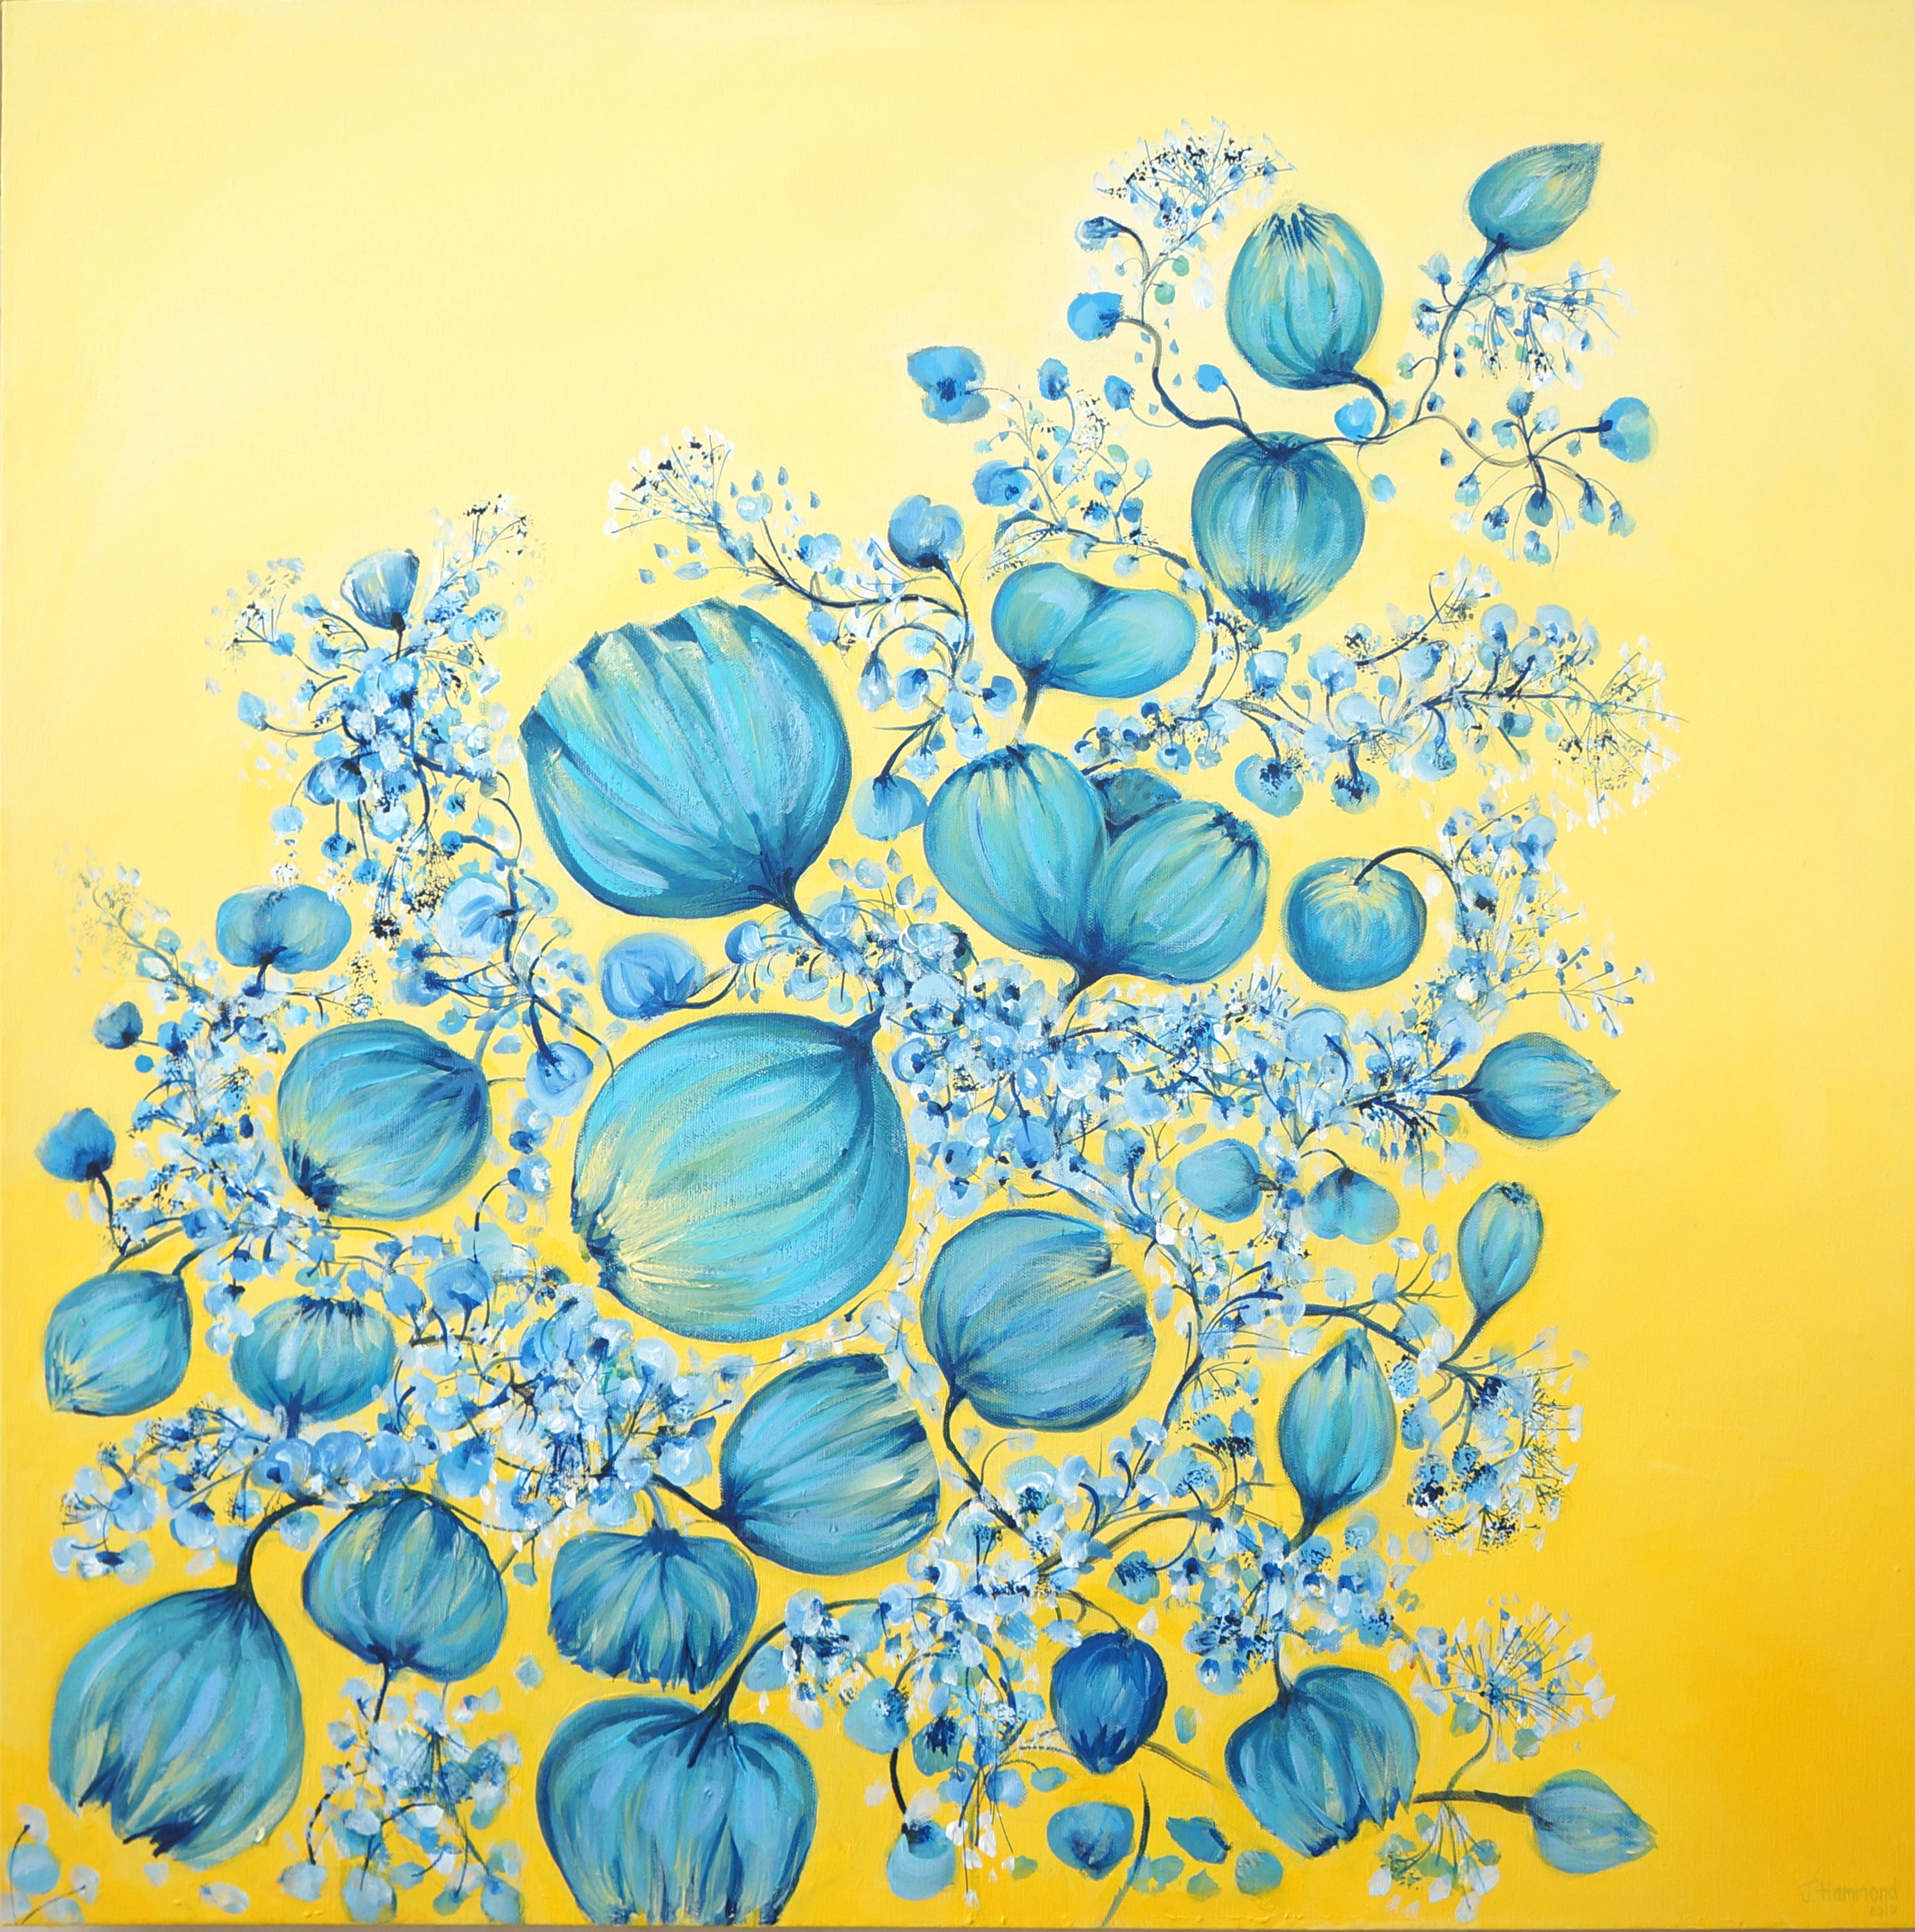 Painting-Growing China Blue Onions - Blooms on Mellow Yellow  Smart Deco Homeware Lighting and Art by Jacqueline hammond